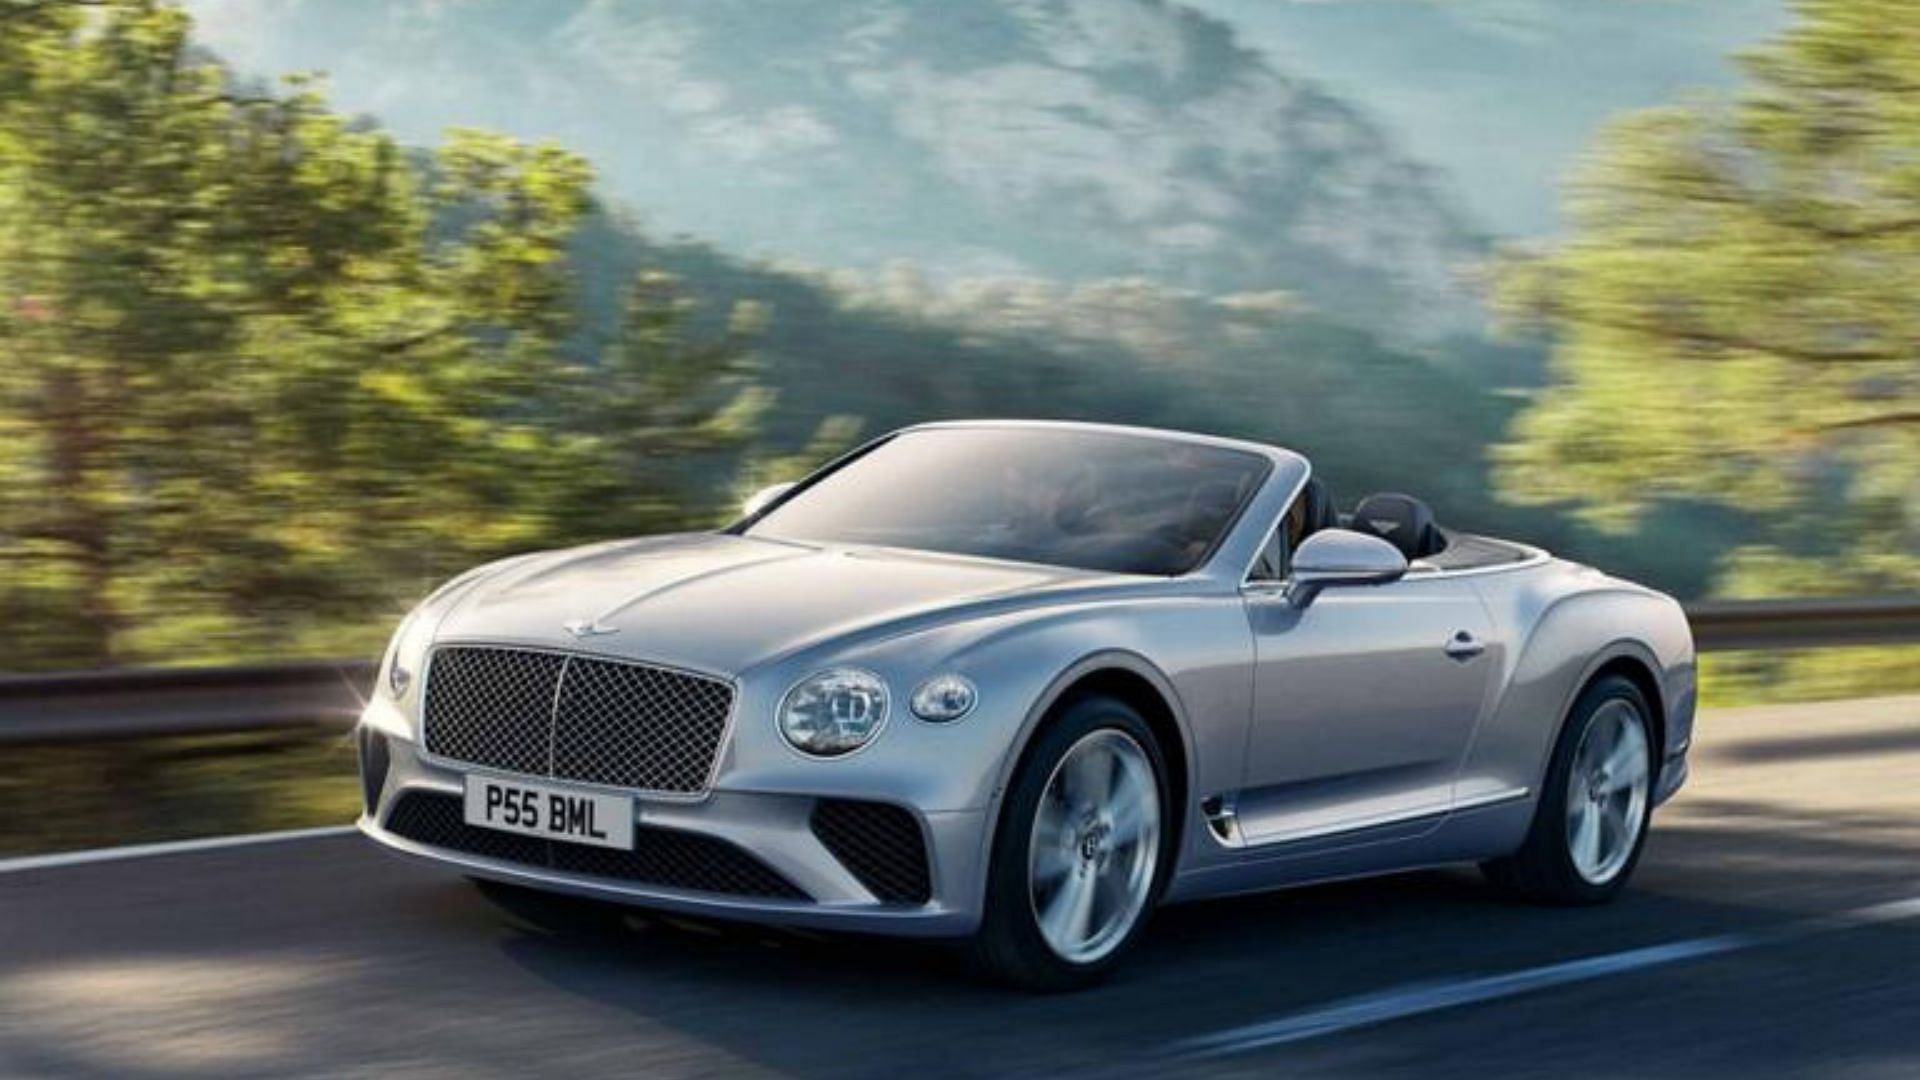 The Continental GTC would be a worthy upgrade over the Paragon R (Image via bentleymotors.com)